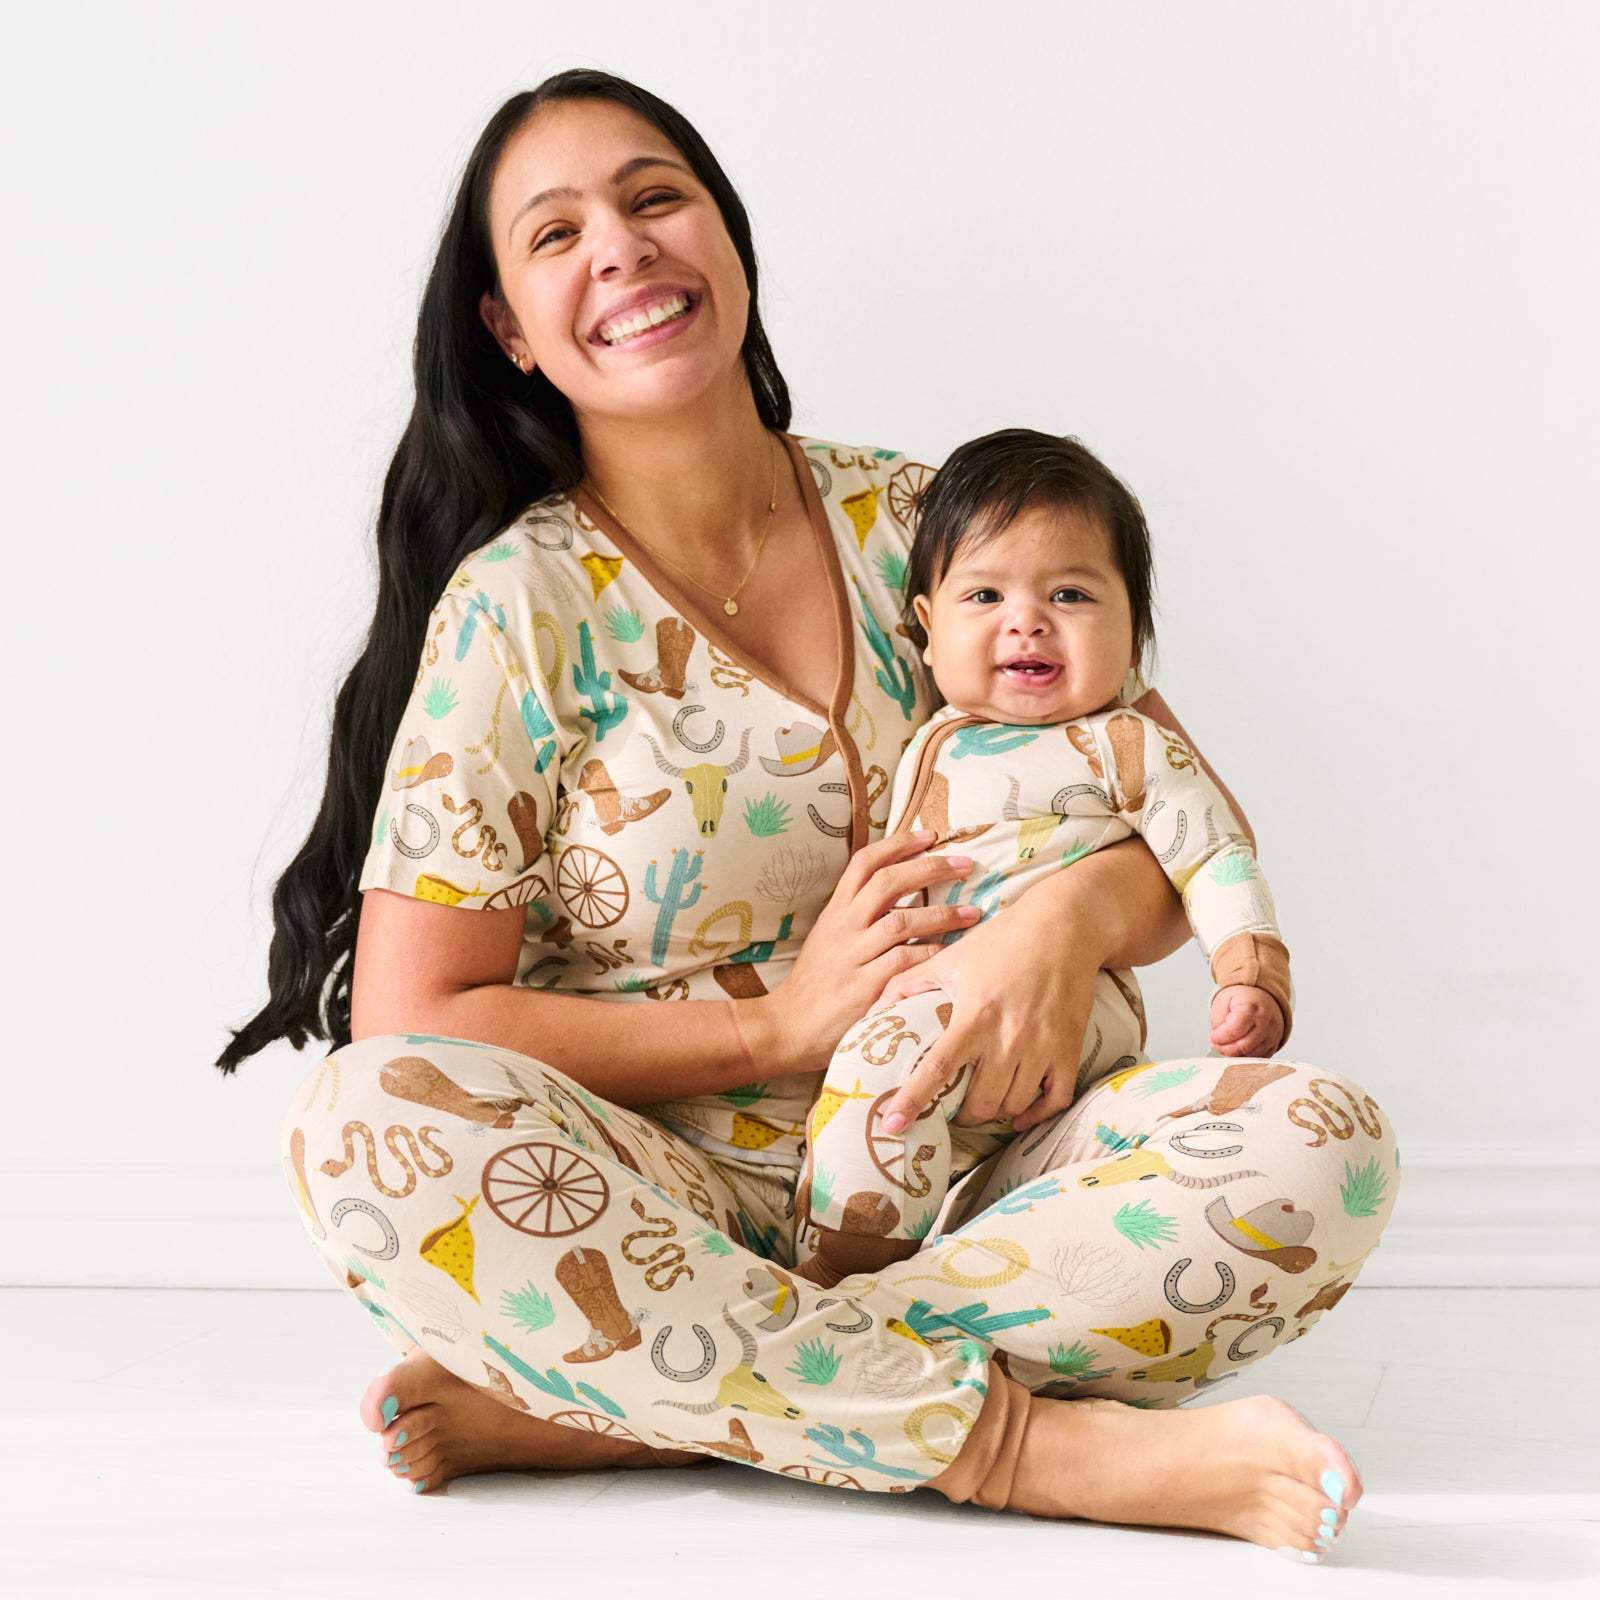 Mother sitting and holding her child. Mom is wearing women's Caramel Ready to Rodeo women's pj top and matching pj pants. Her daughter is wearing a matching zippy